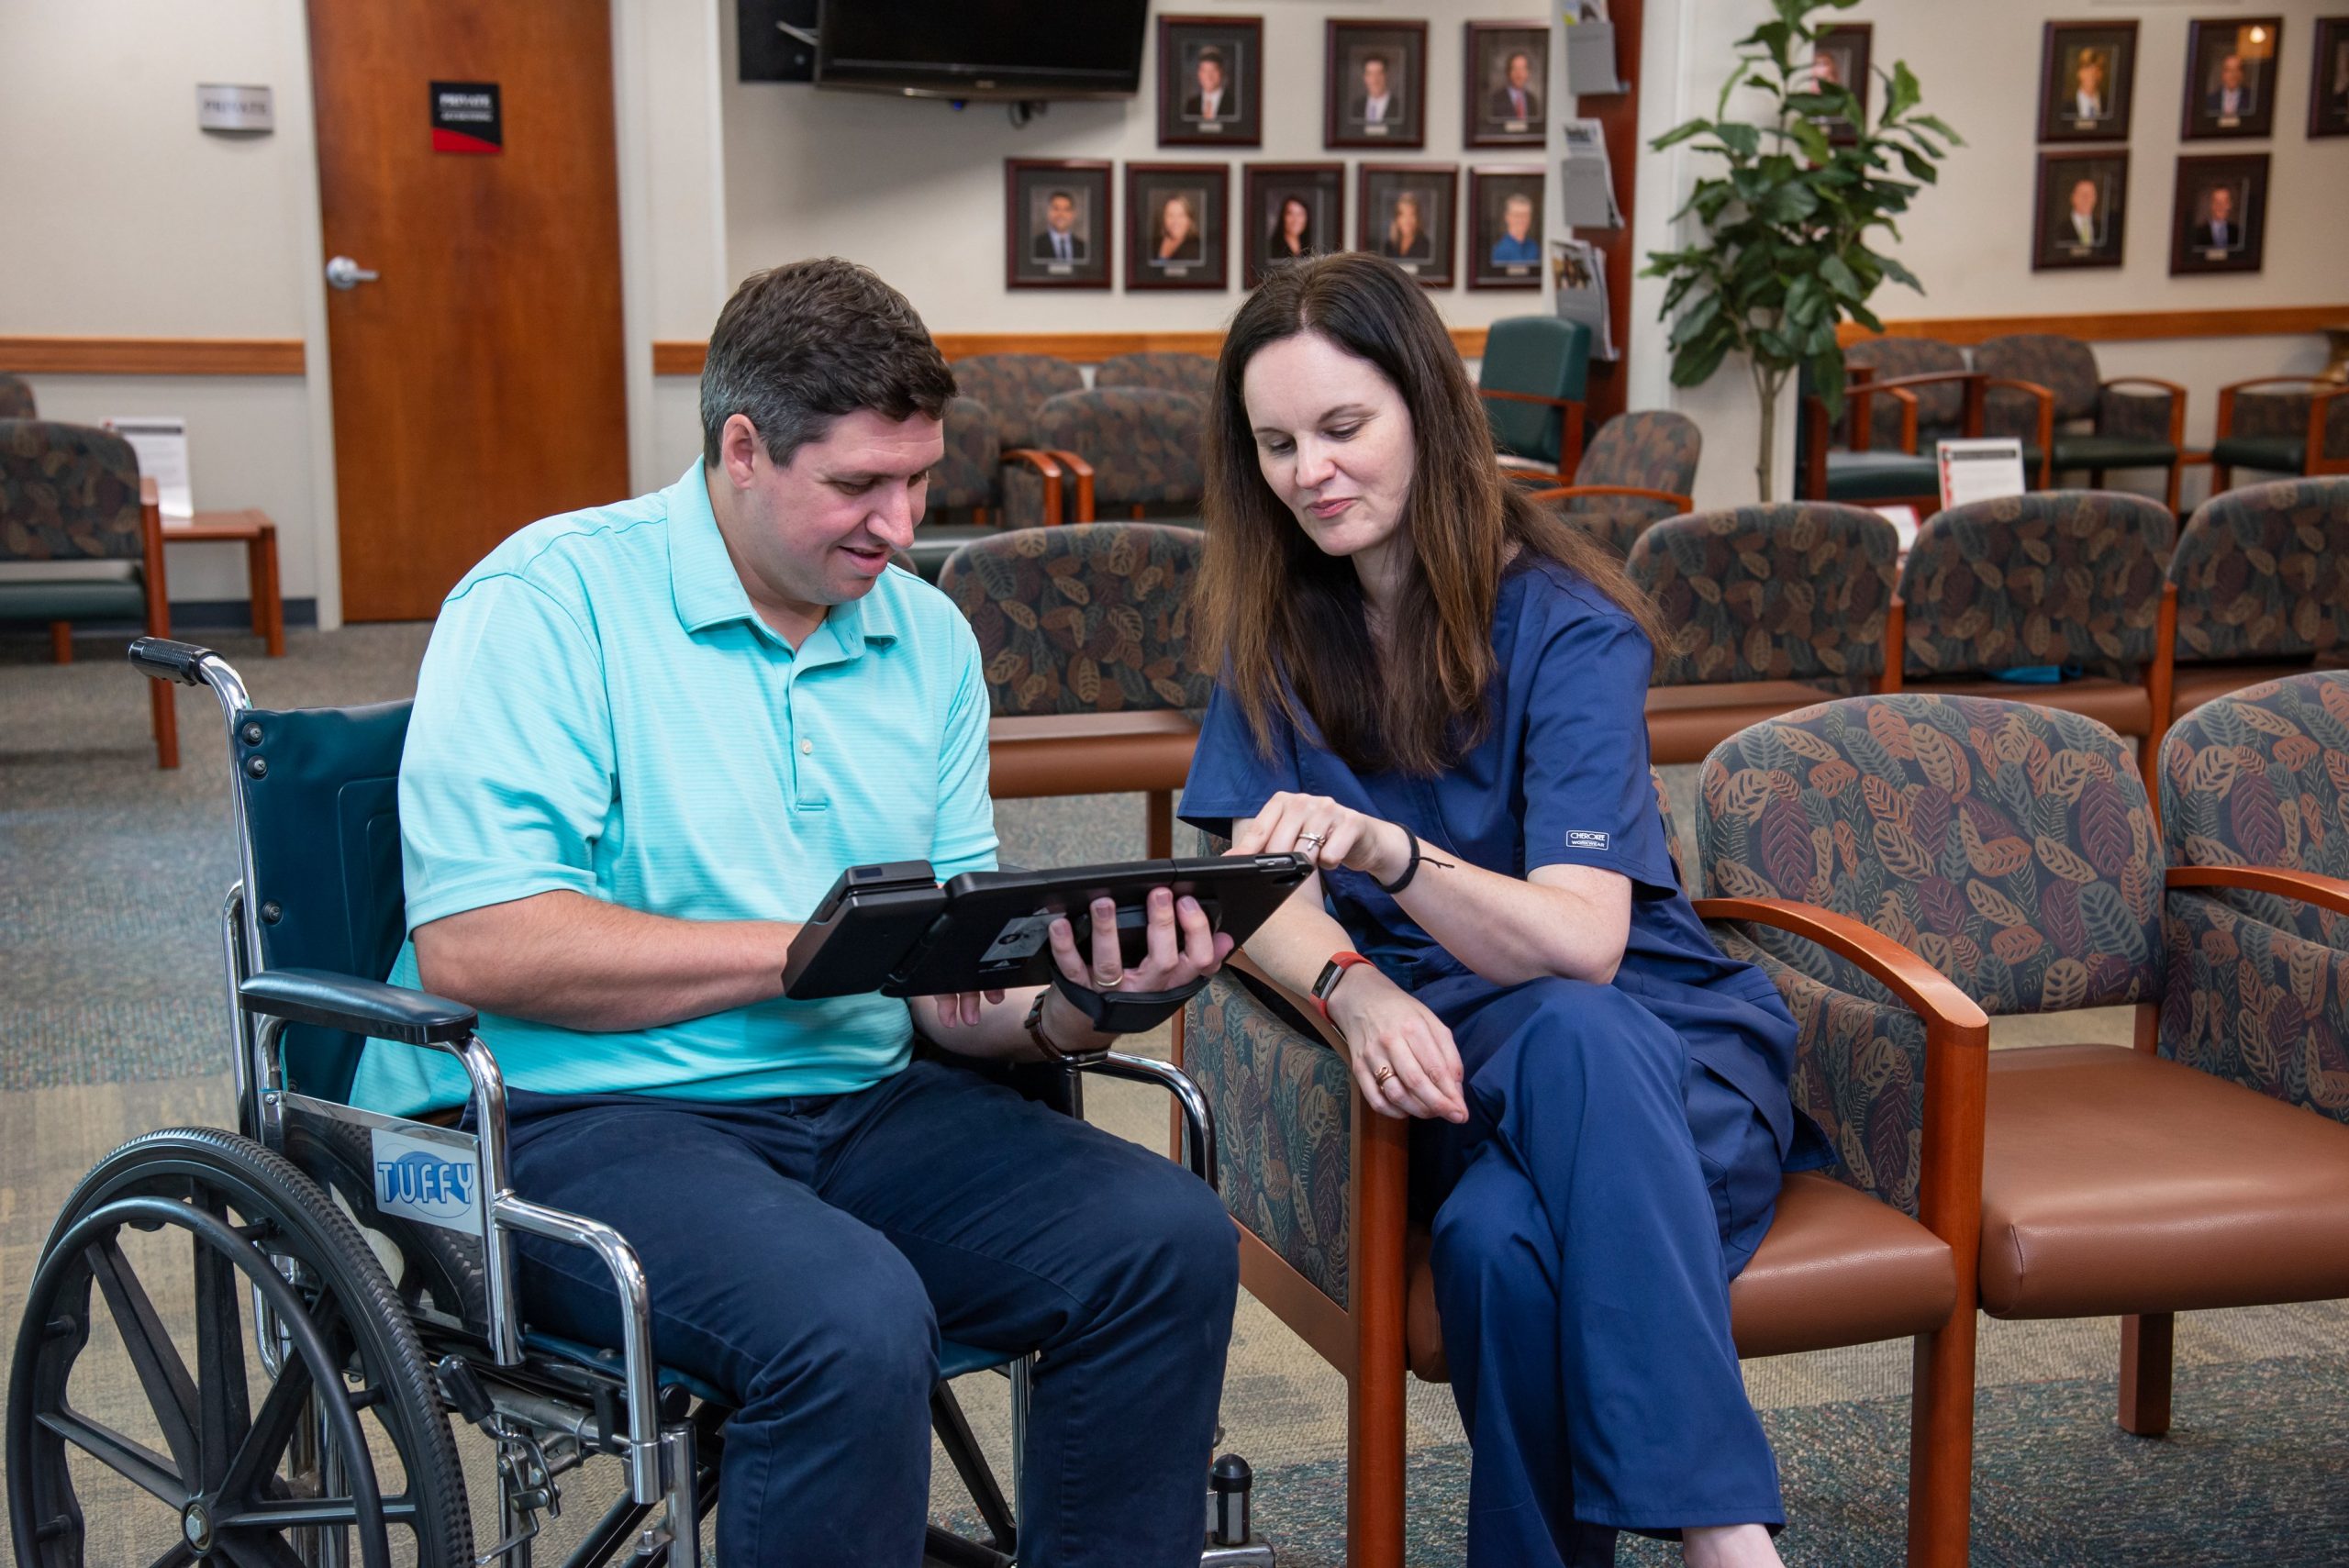 Woman assisting man in wheelchair with checking in to medical appointment using the Clearwave Connect tablet